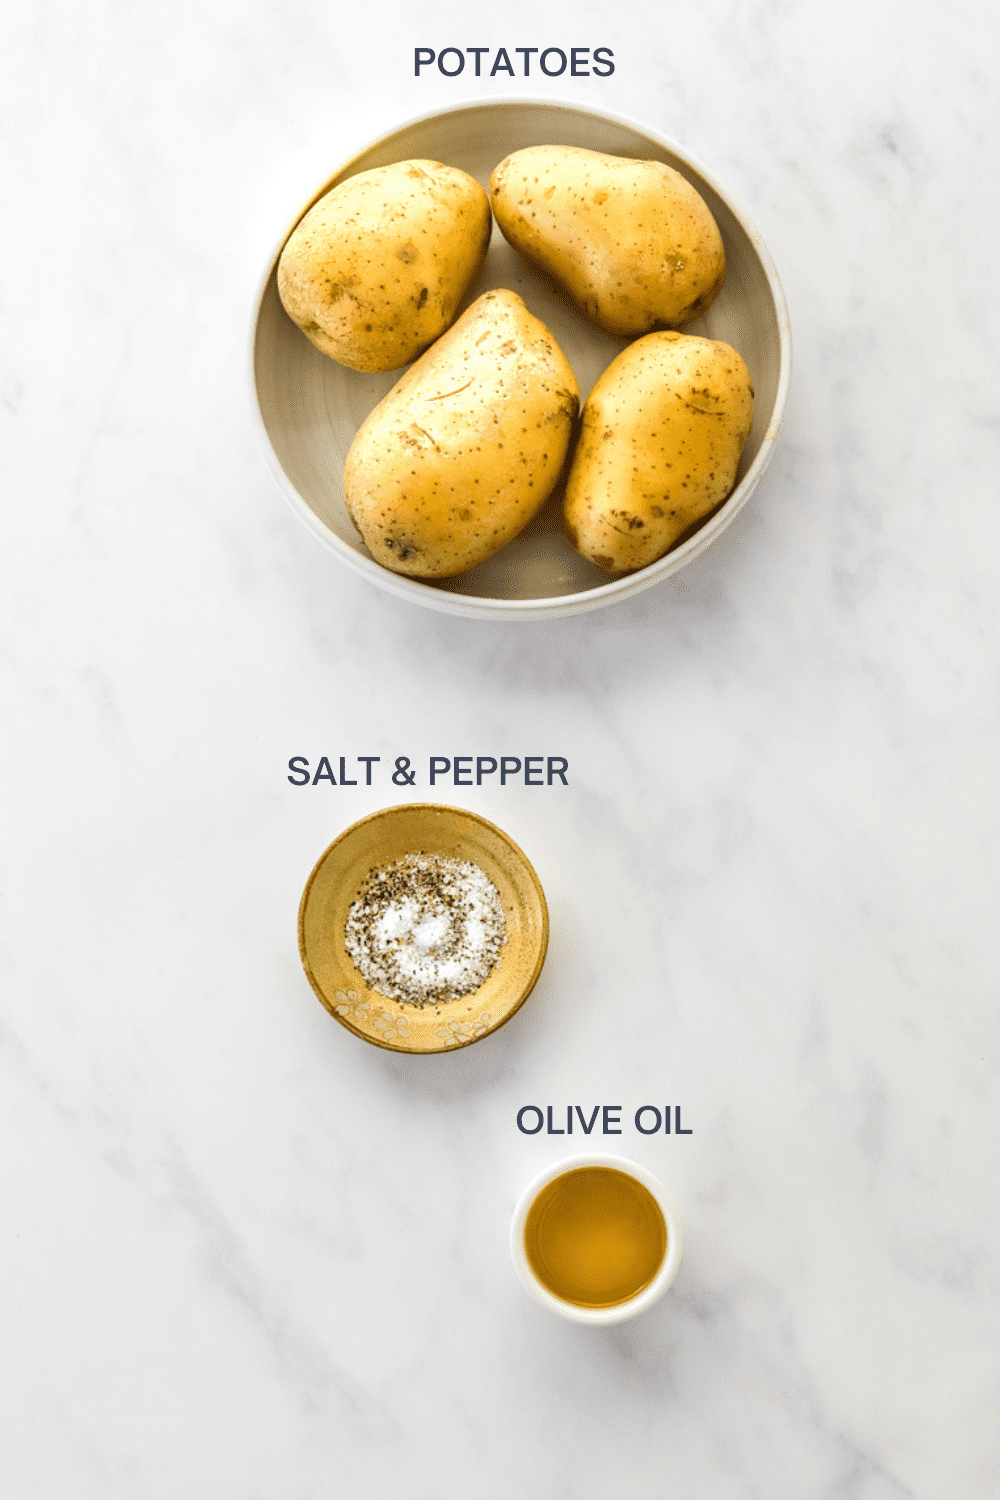 Bowl of 4 potatoes with a yellow bowl filled with salt and pepper and a small bowl filled with olive oil in front of it with labels over each ingredient.